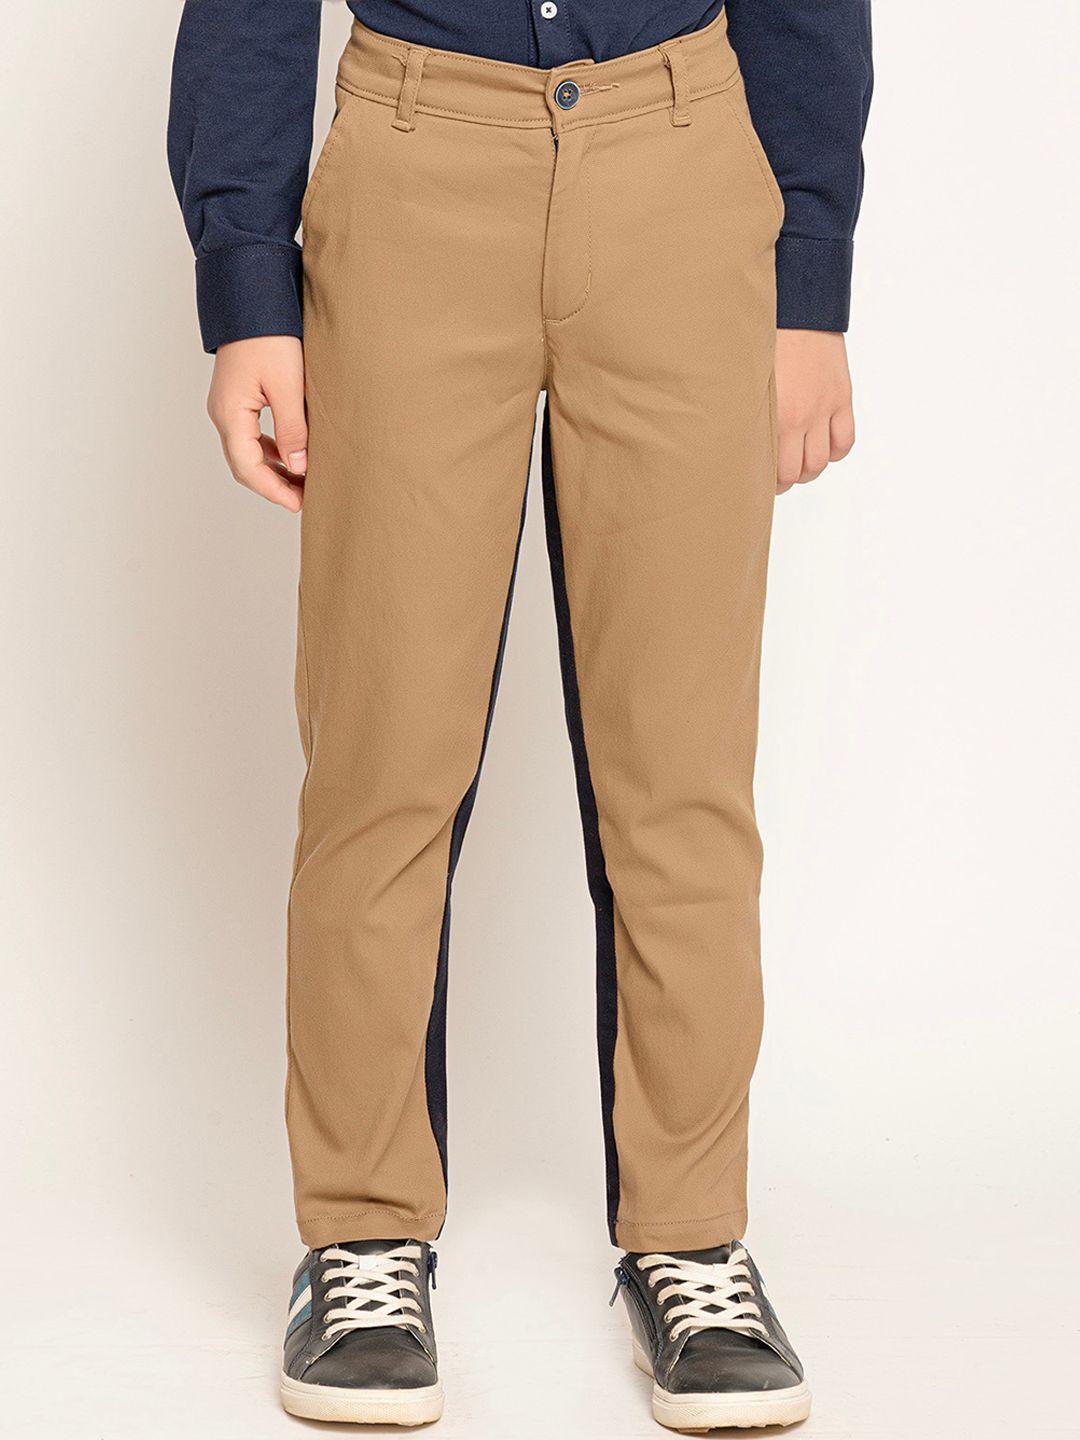 one friday boys mid rise plain relaxed cotton chinos trousers